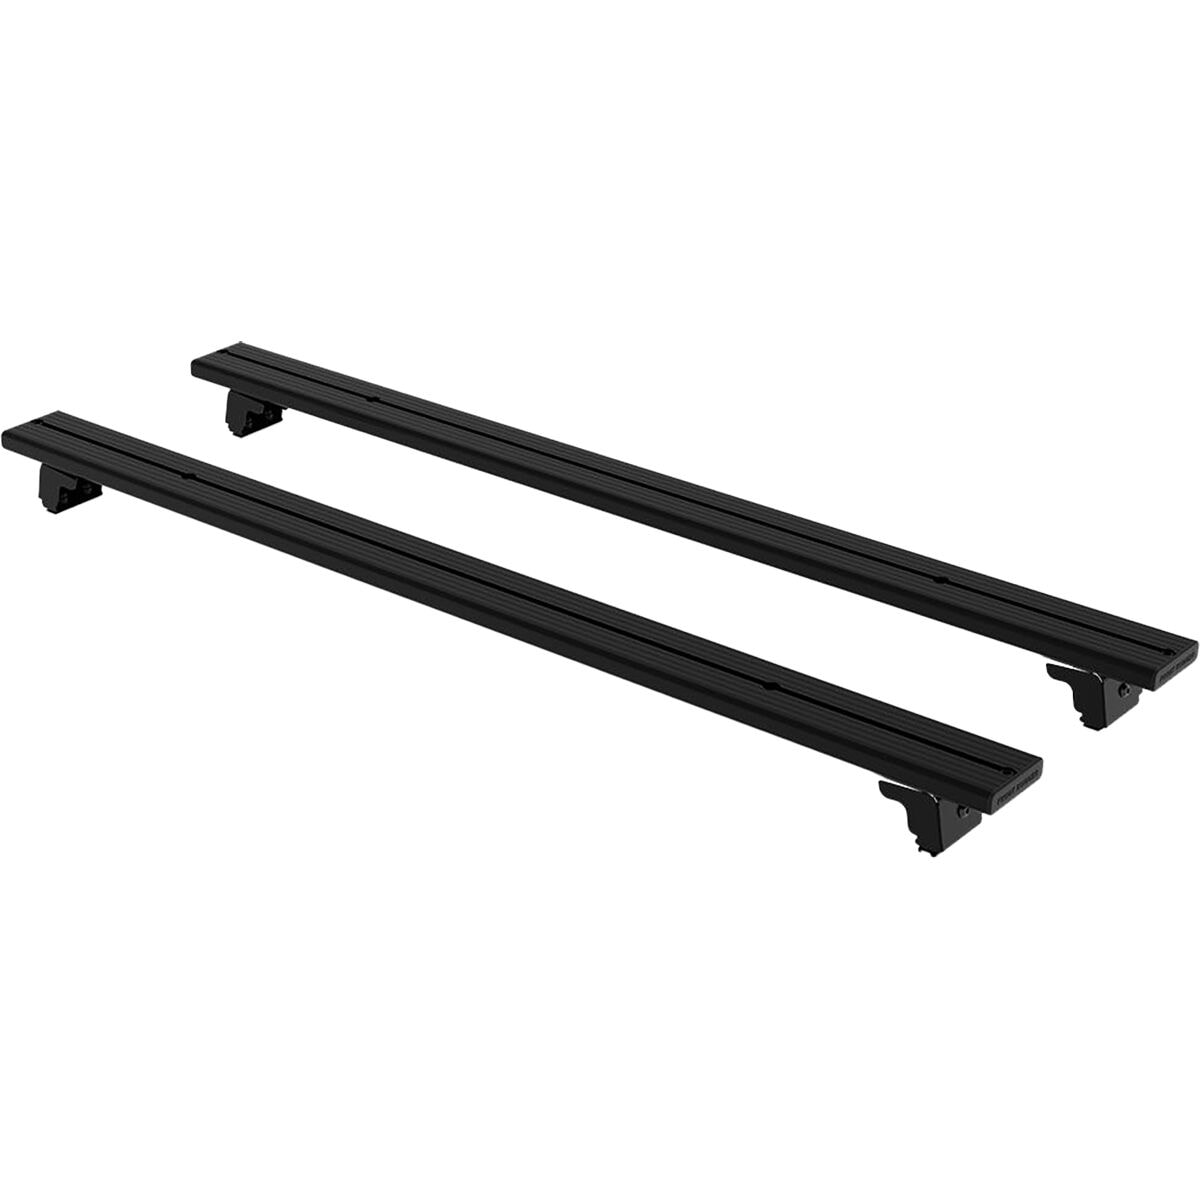 FrontRunner RSI Double Cab Smart Canopy Load Bar Kit